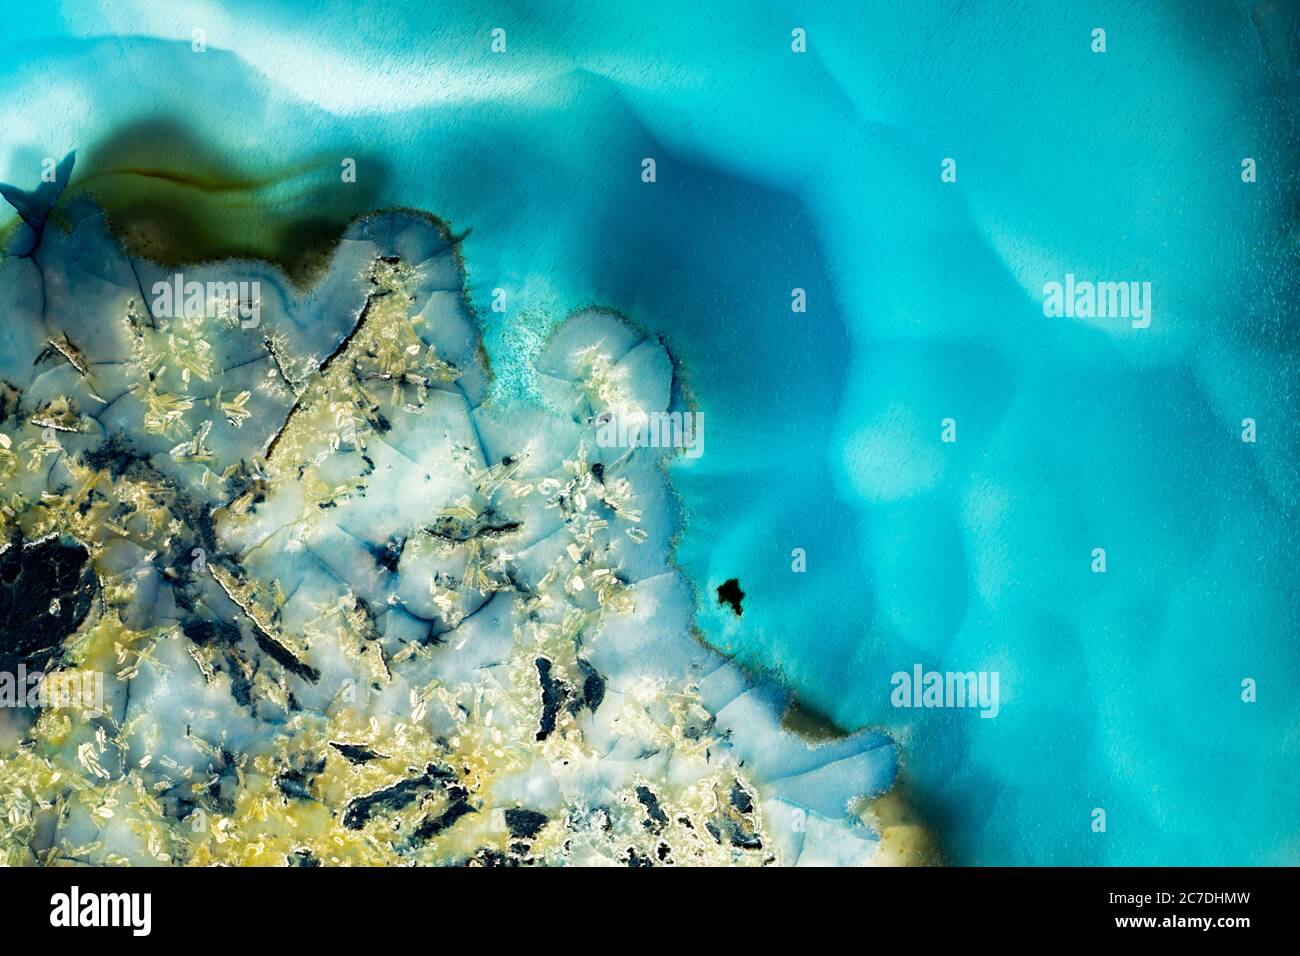 Agate rock slice with colorful turquoise blue and white mineral textures. Stock Photo